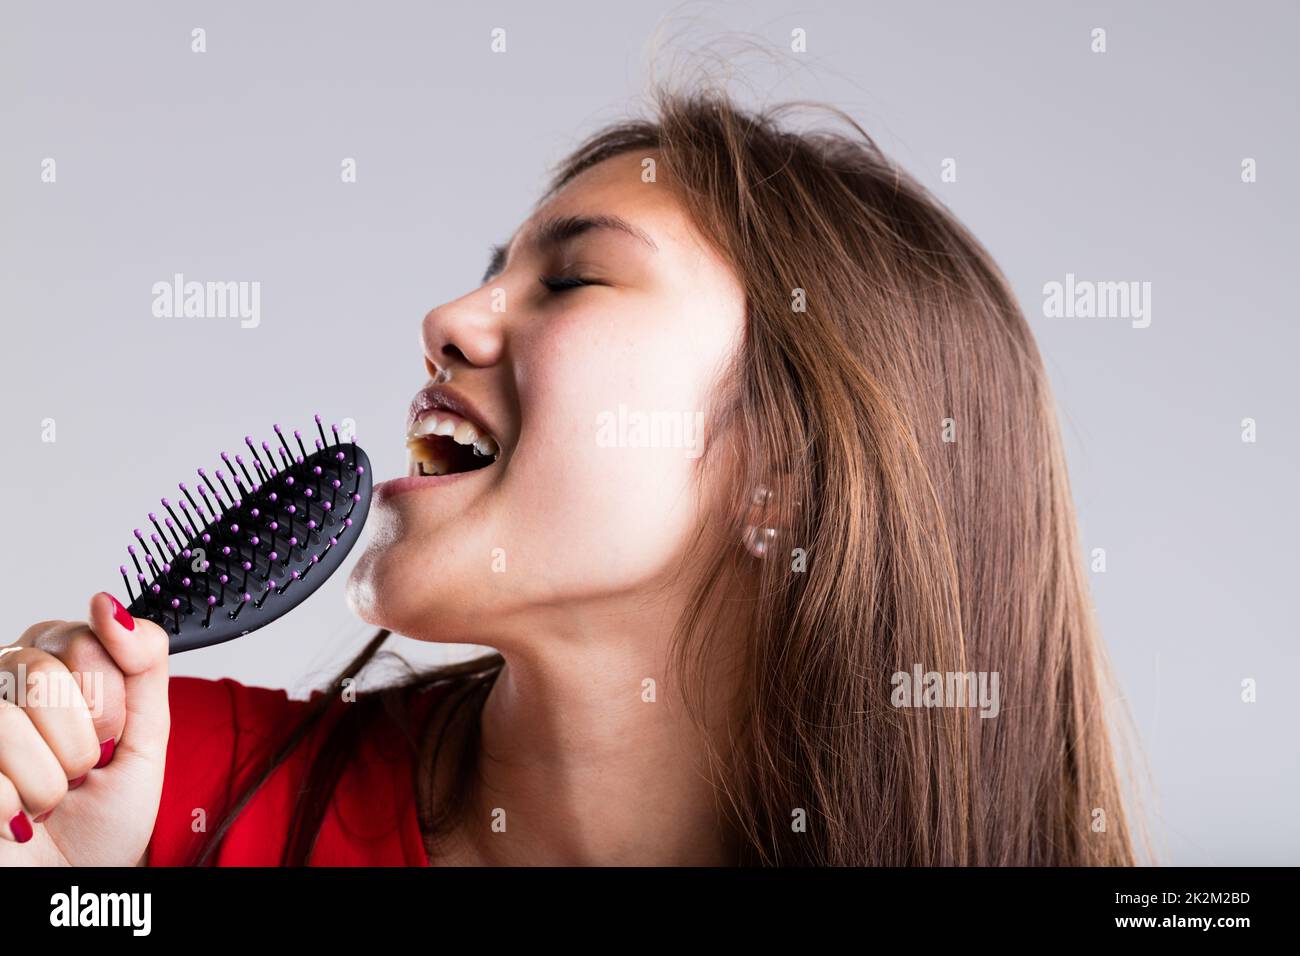 passionate girl pretending to sing with her hairbrush Stock Photo